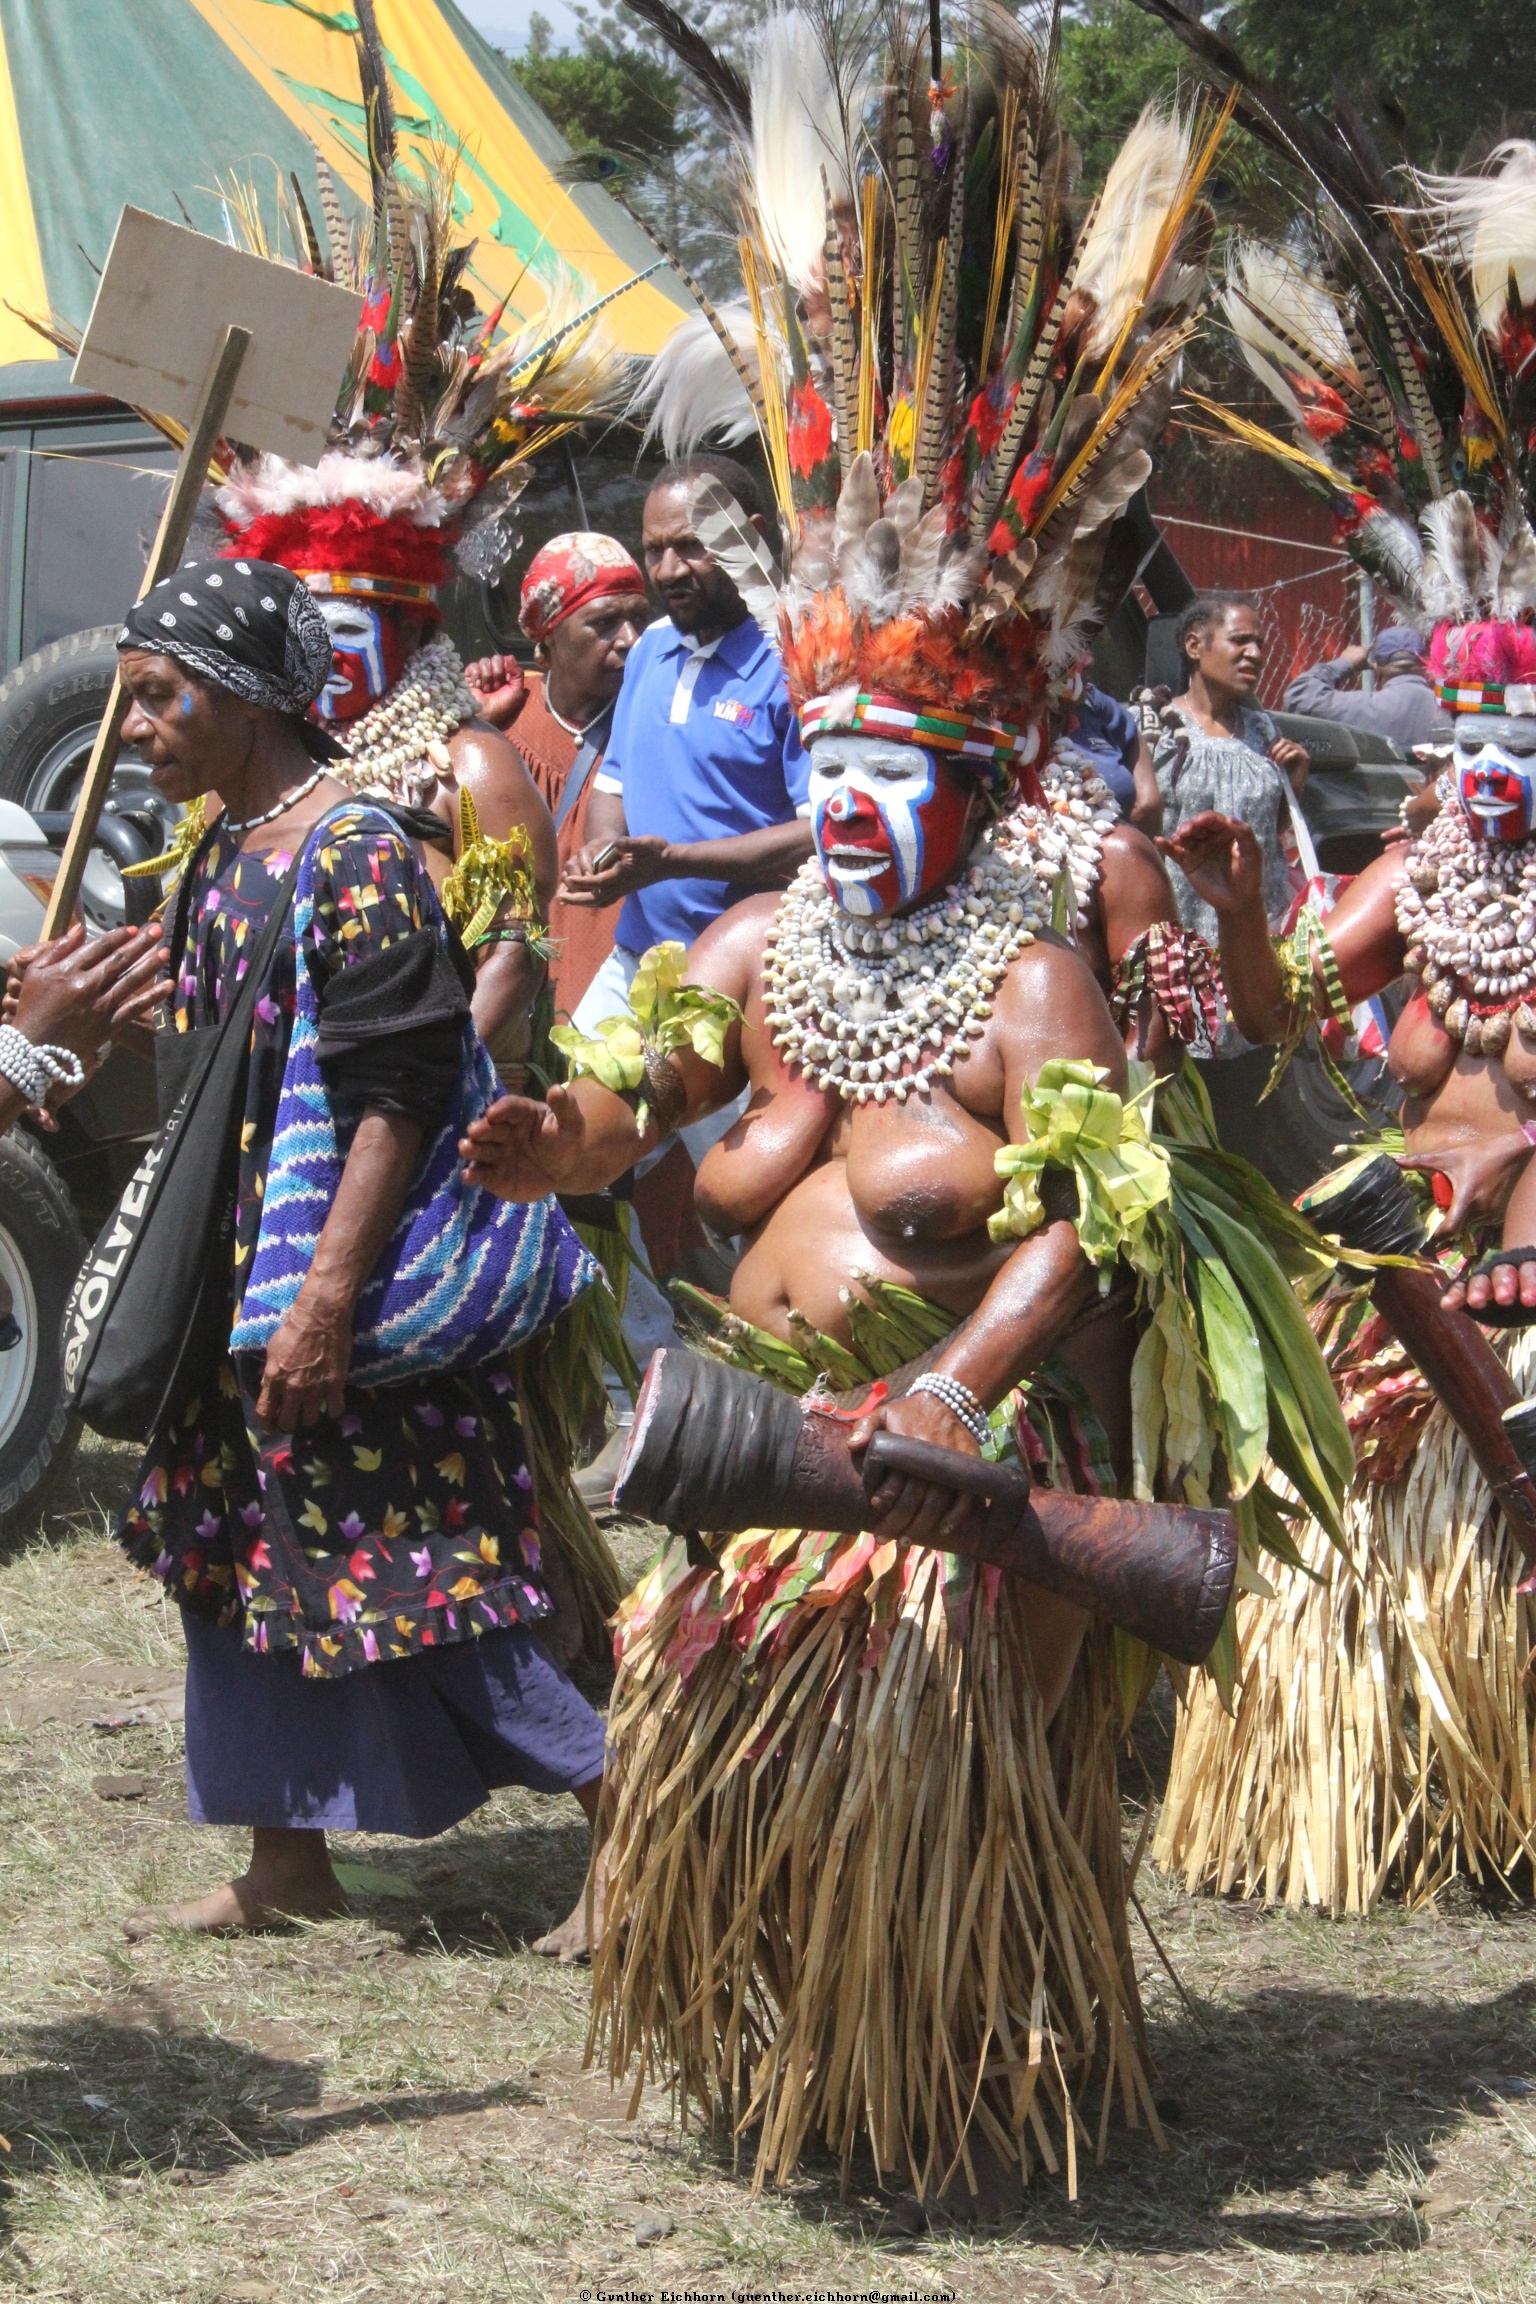 Papua New Guinea - Land of 800 languages and tribal customs